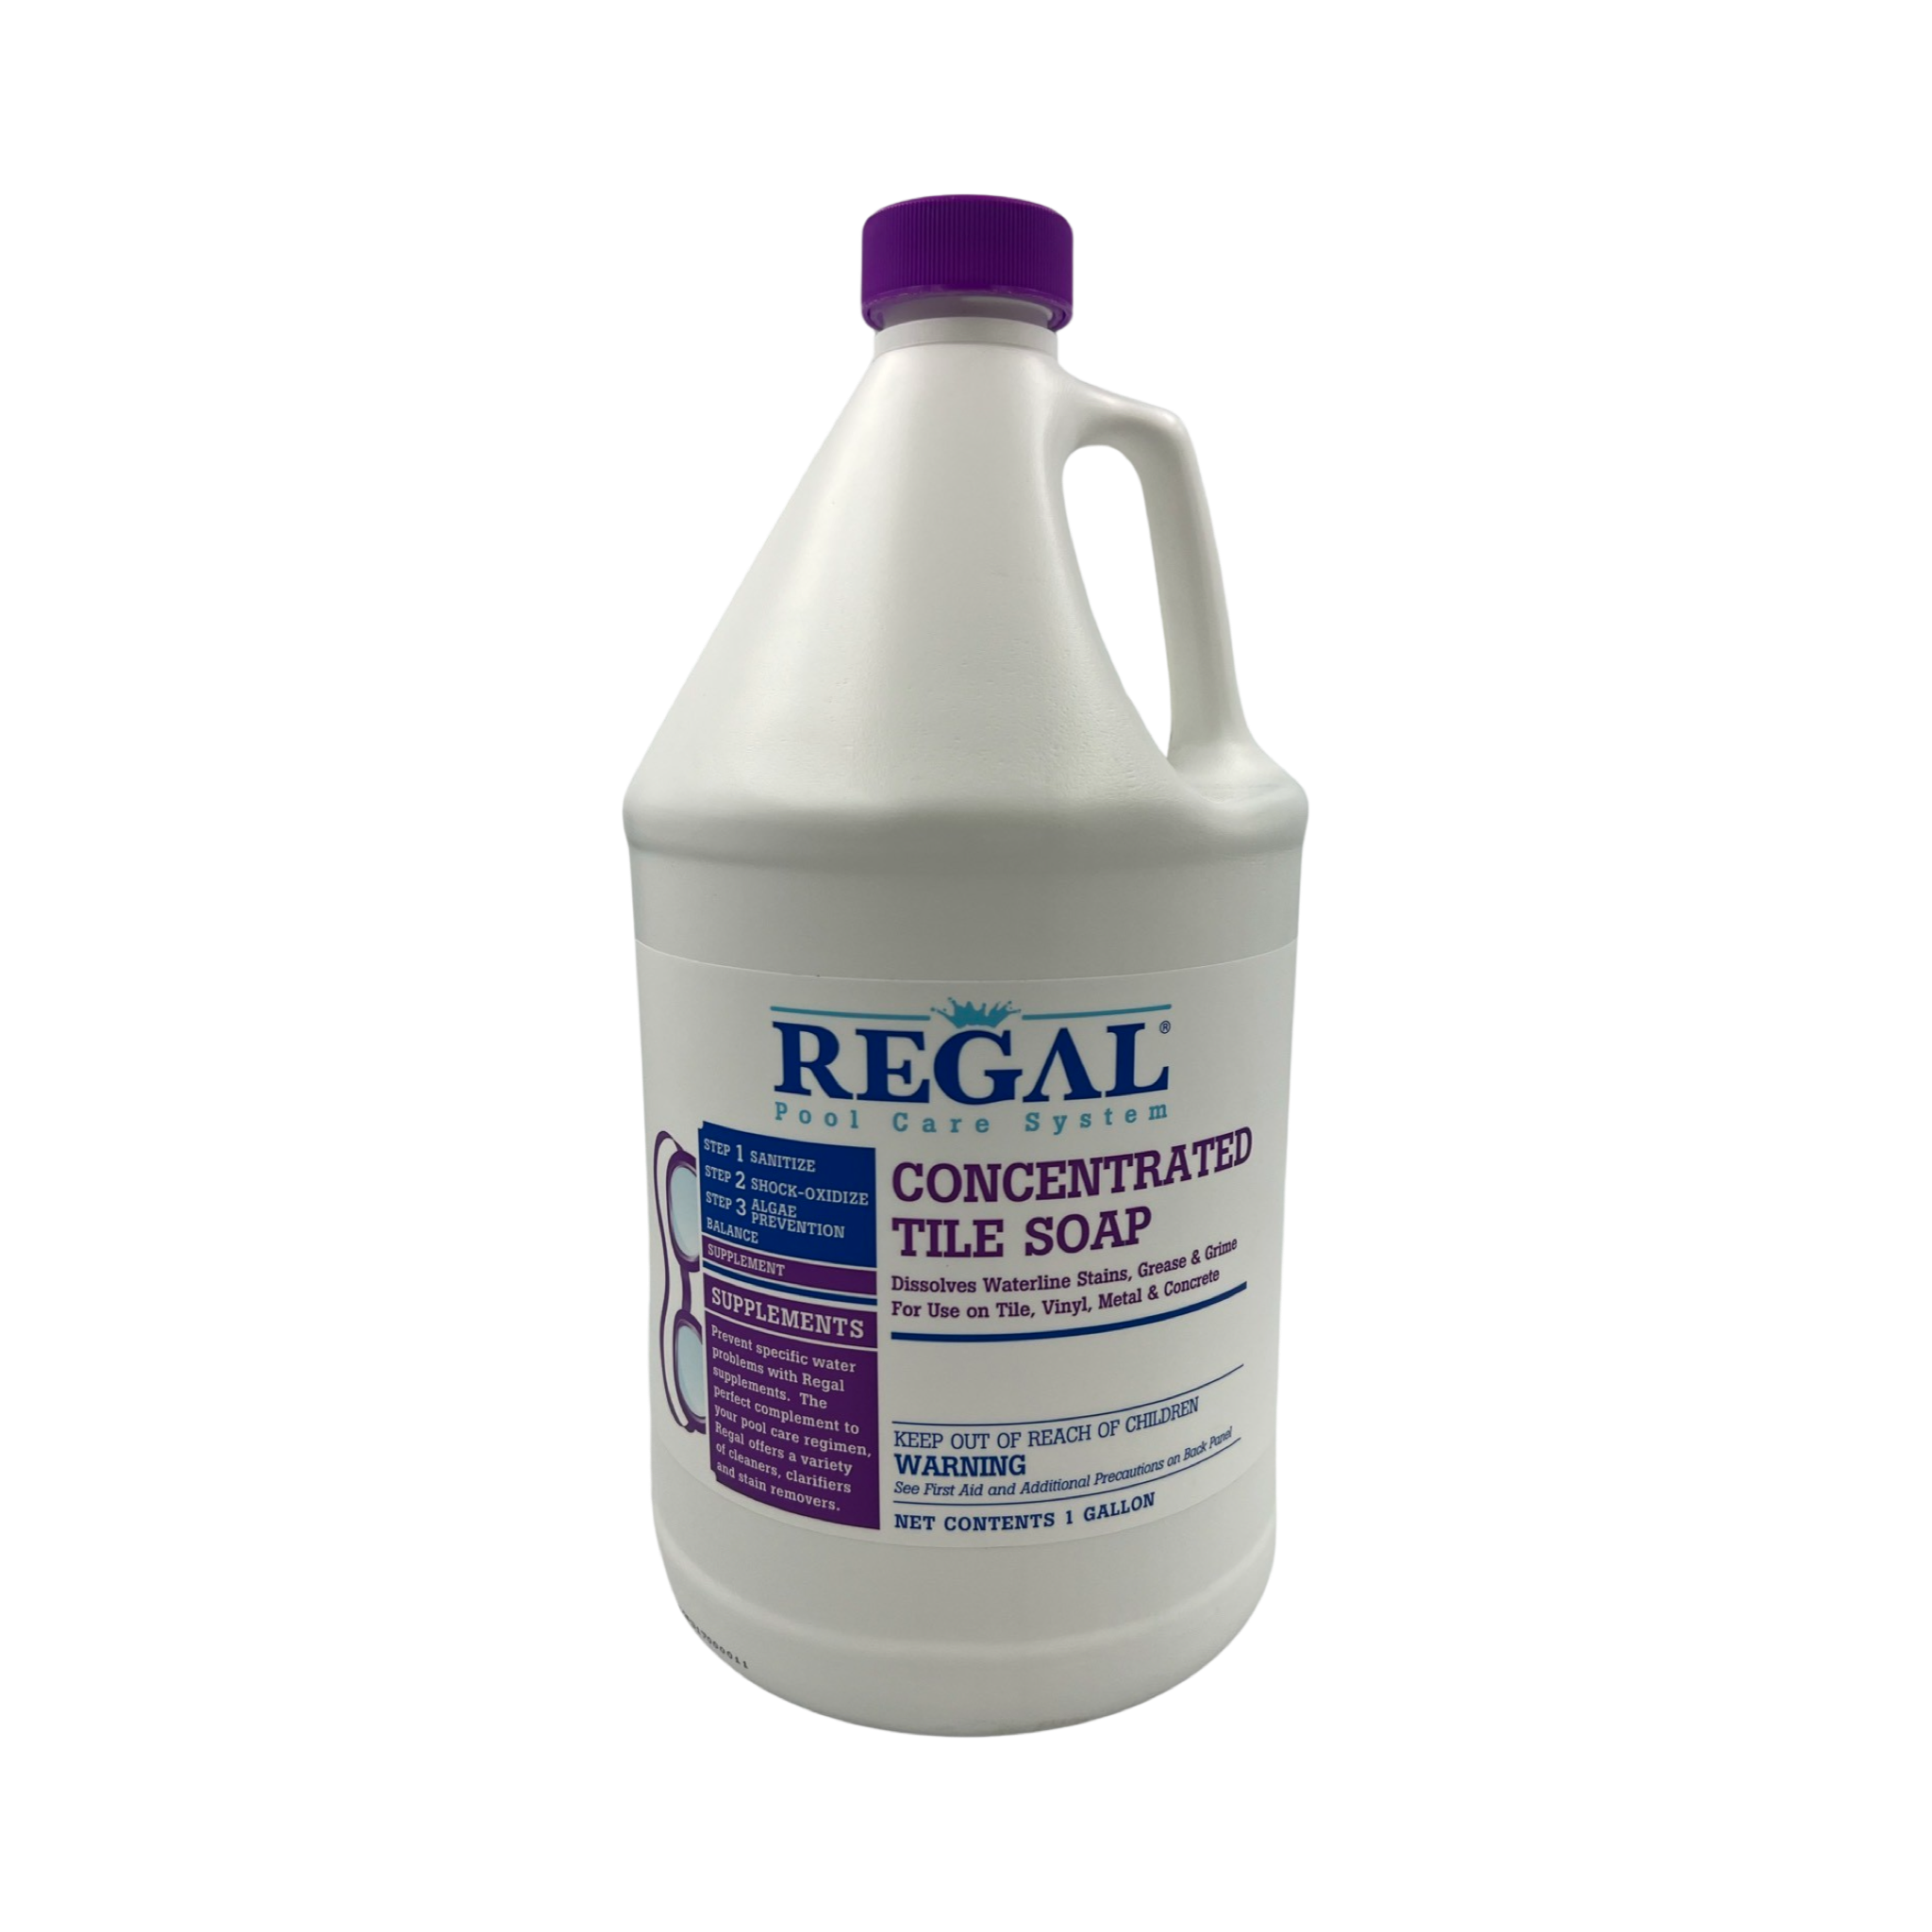 Regal Concentrated Tile Soap - 47247850